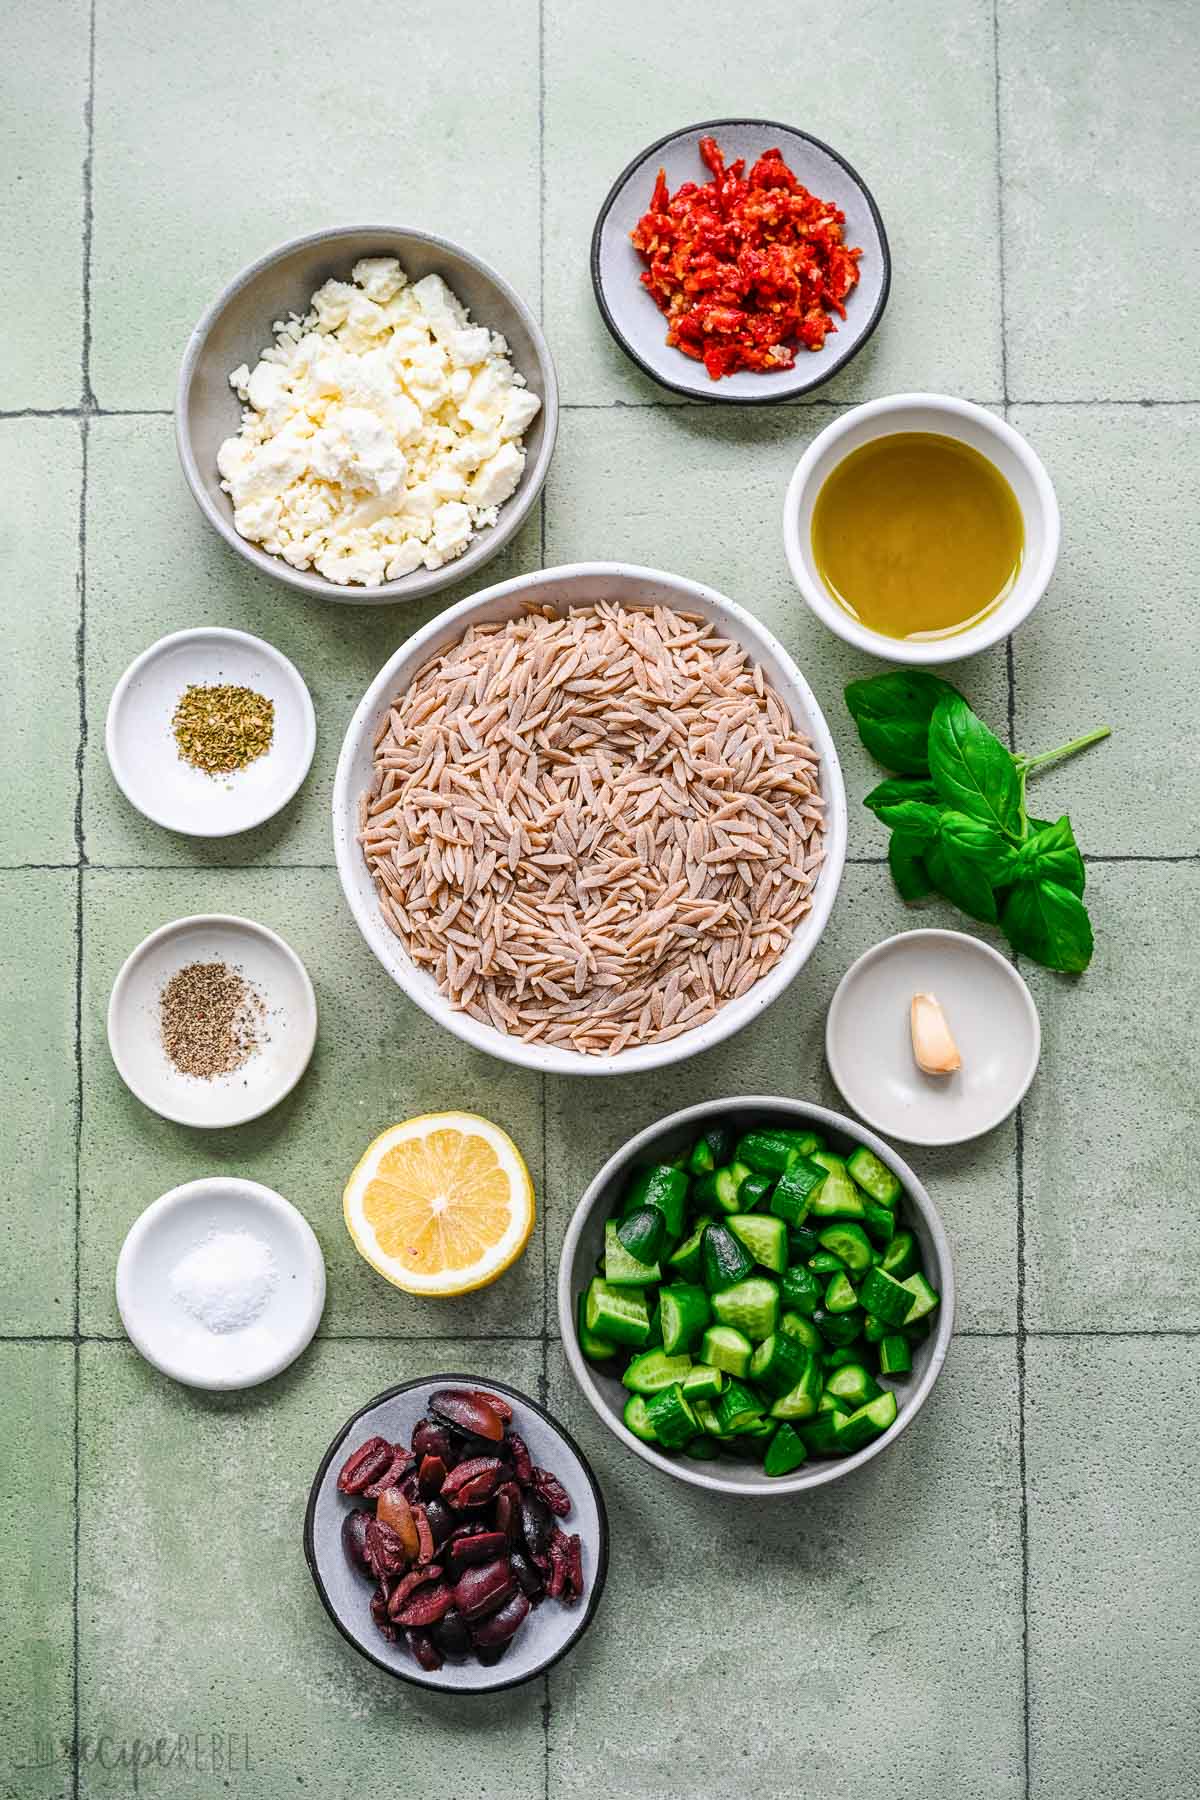 Top view of ingredients needed to make Greek pasta salad in small bowls.